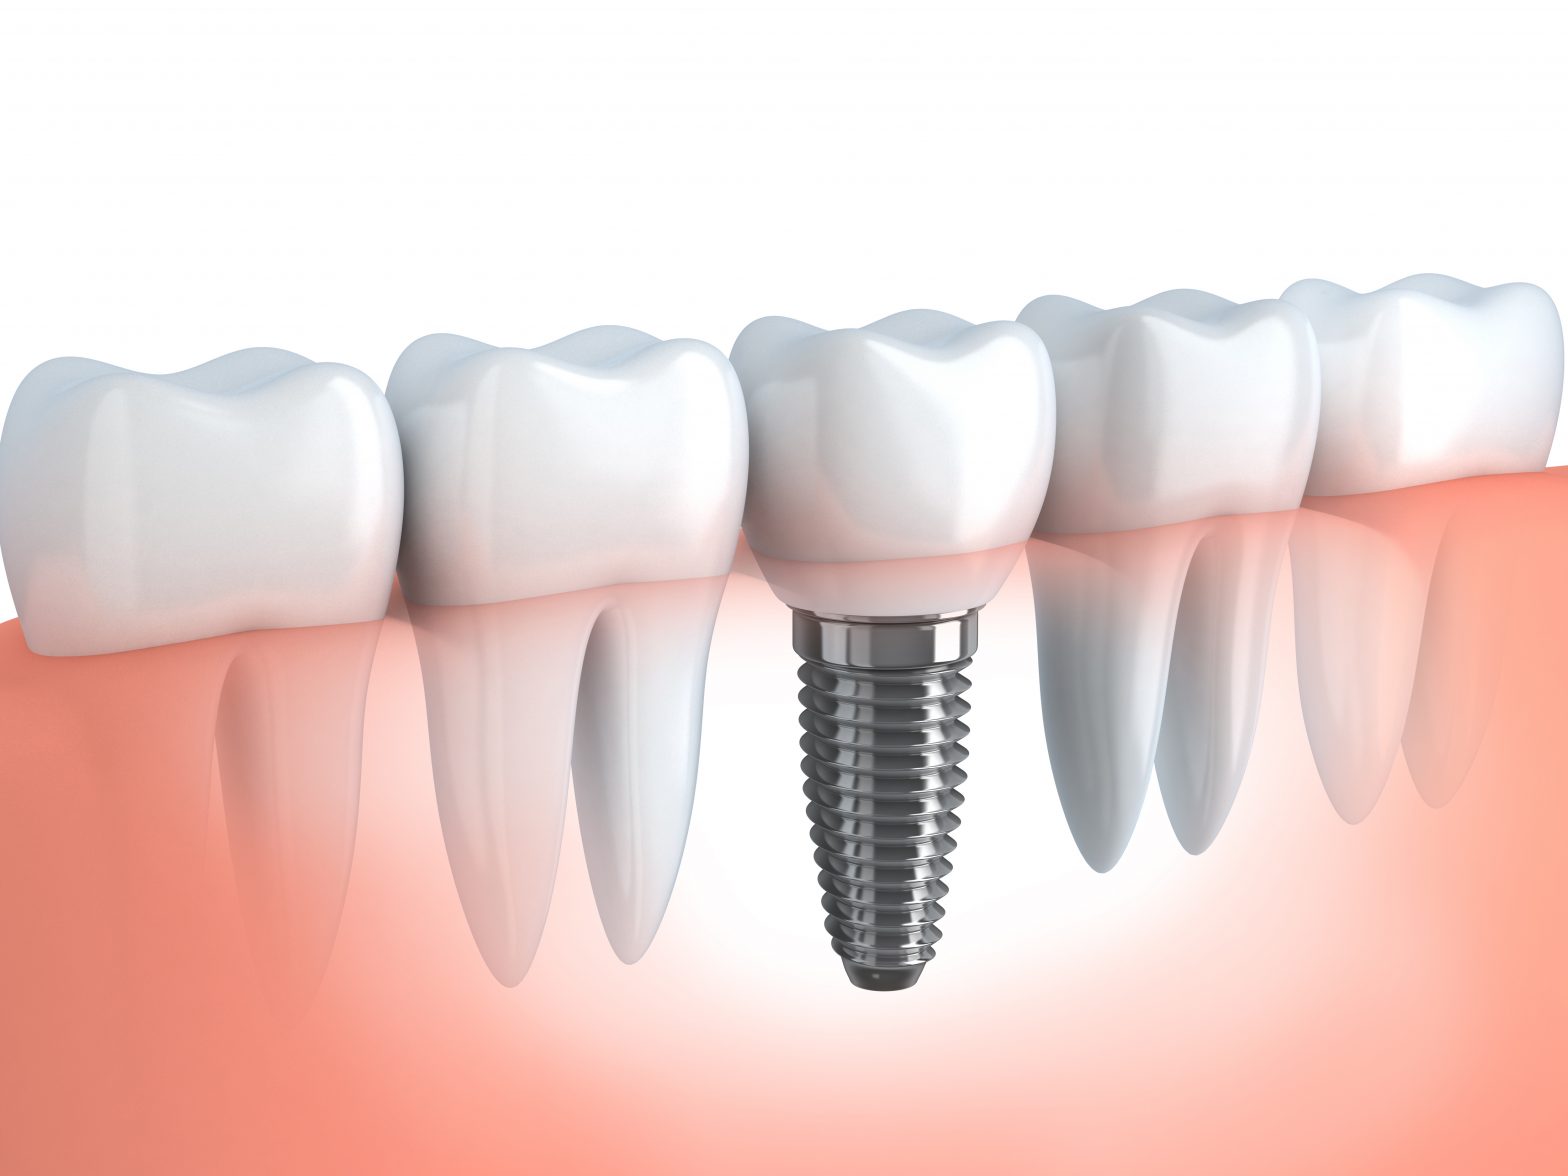 What to Expect During Dental Implant SurgeryGregory skeens d.d.s.encinitas family dentistry